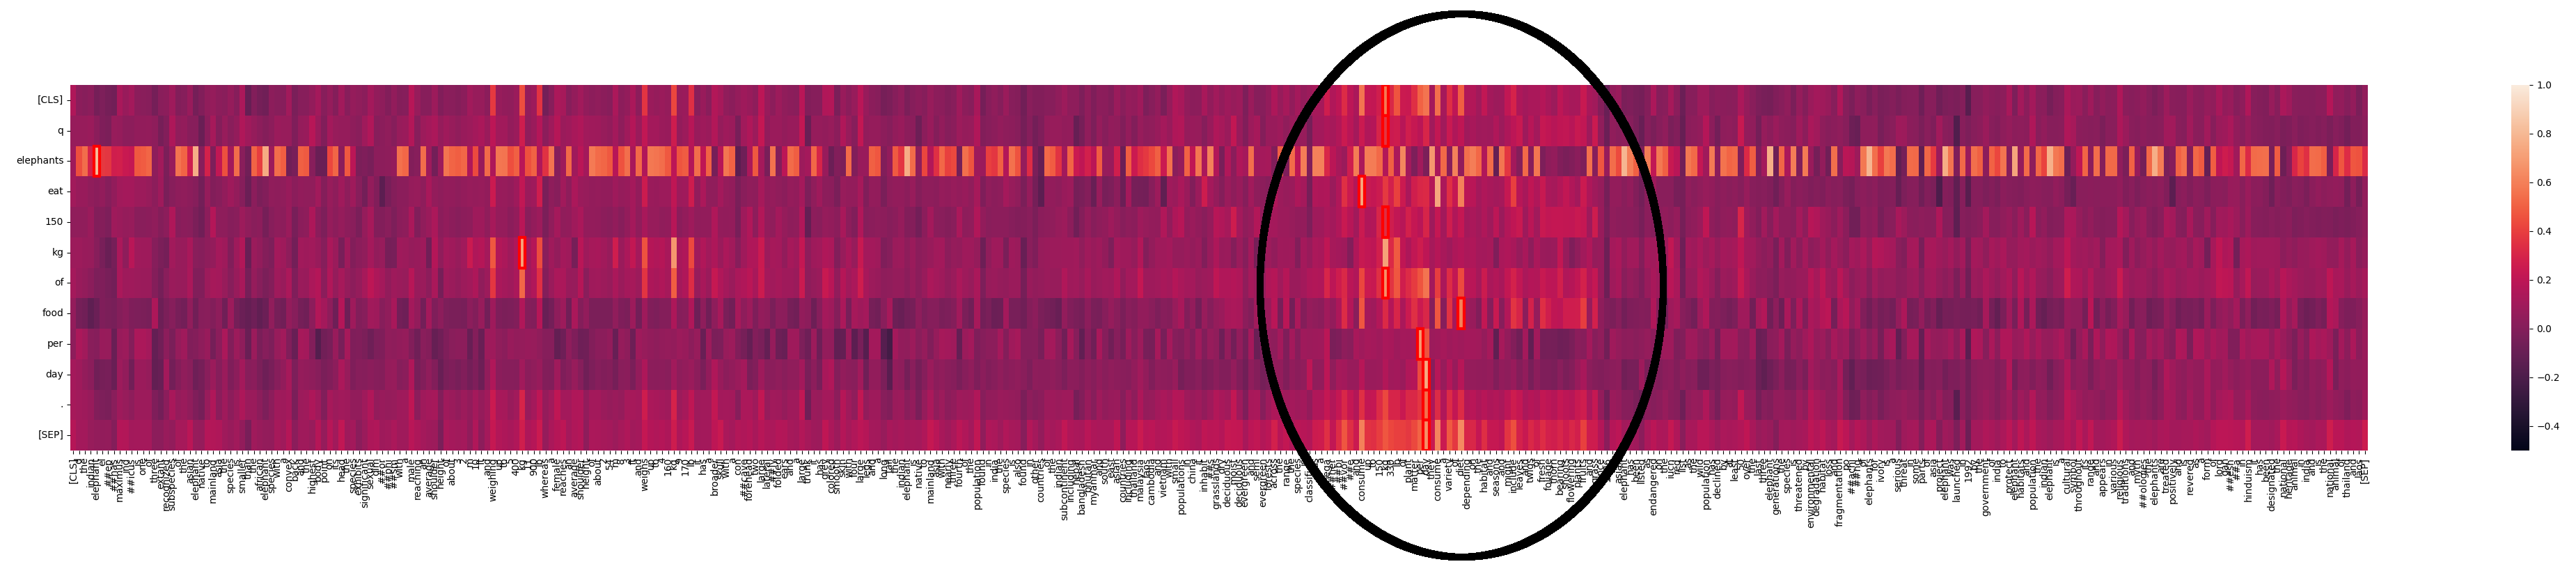 Genomic heatmap with red and black patterns, axis labeled 'XNTY', and highlighted regions indicating data points.